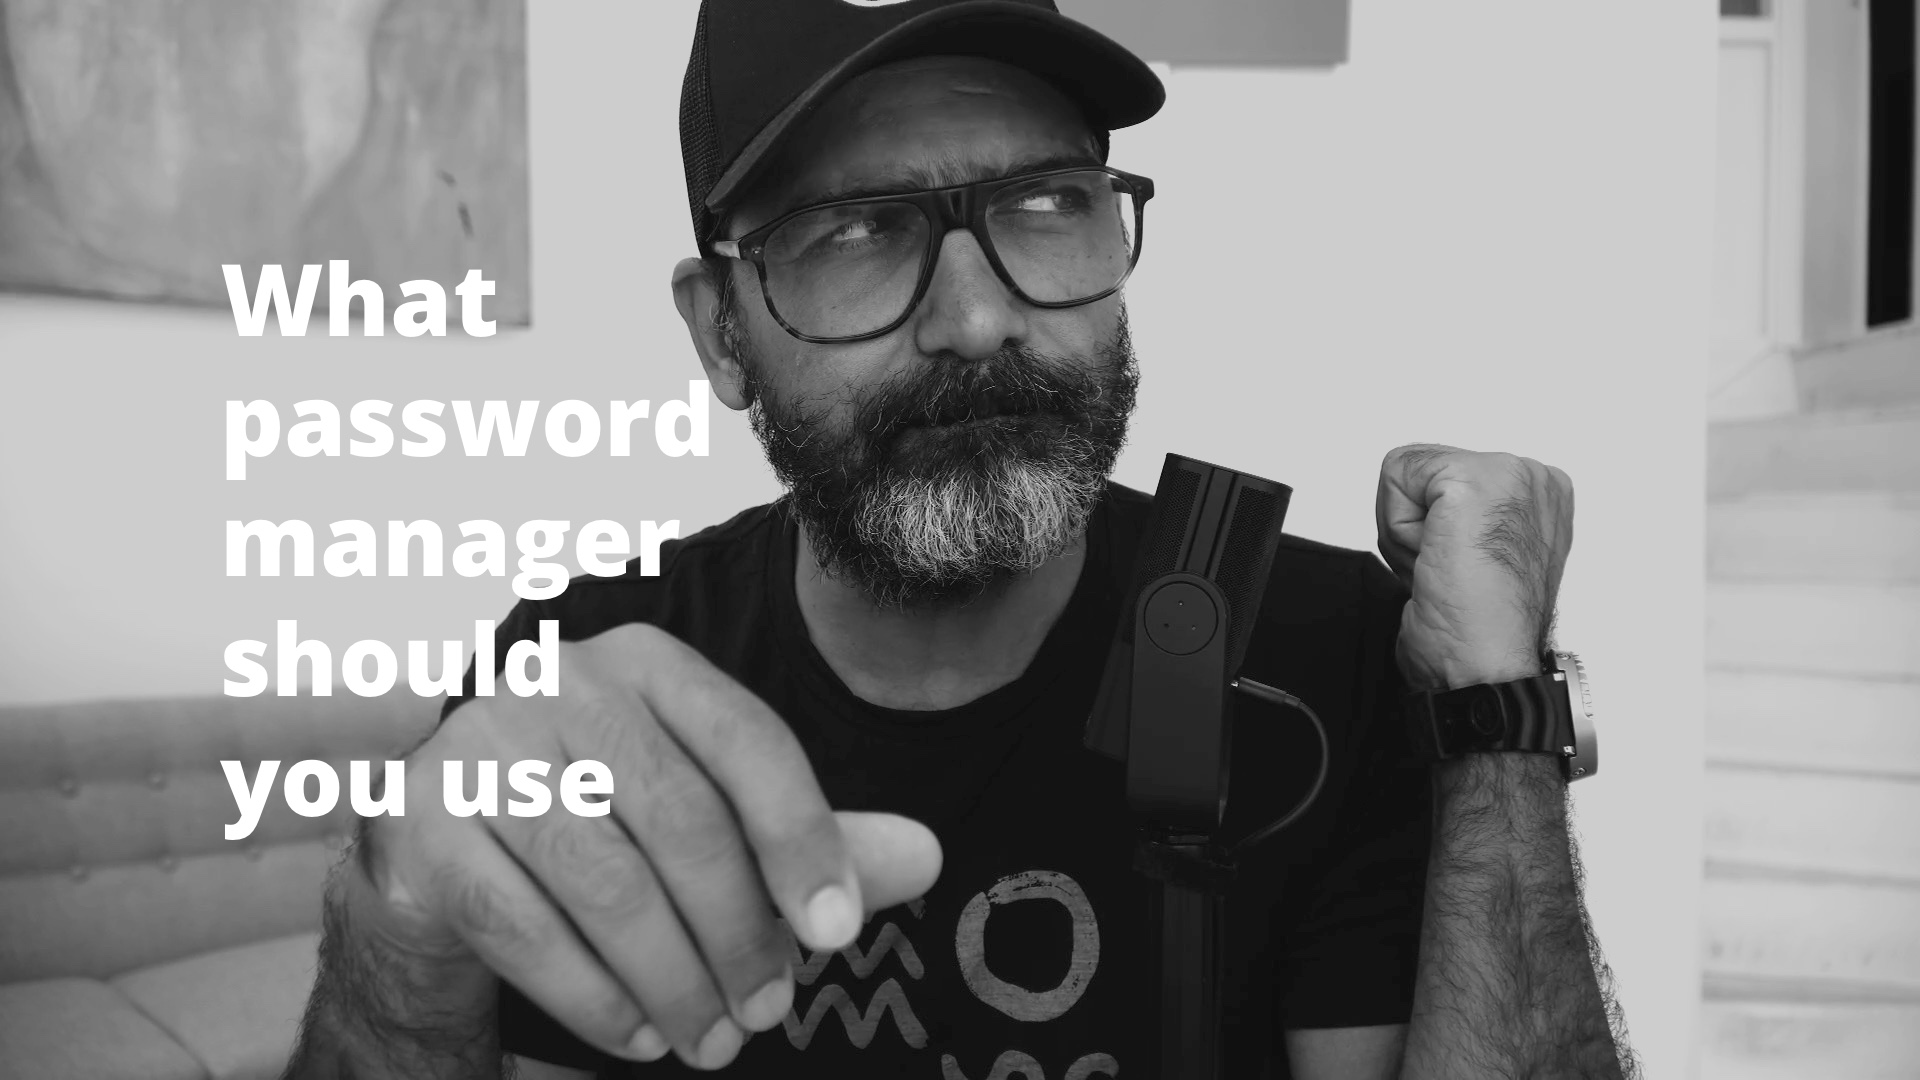 What password manager should you use